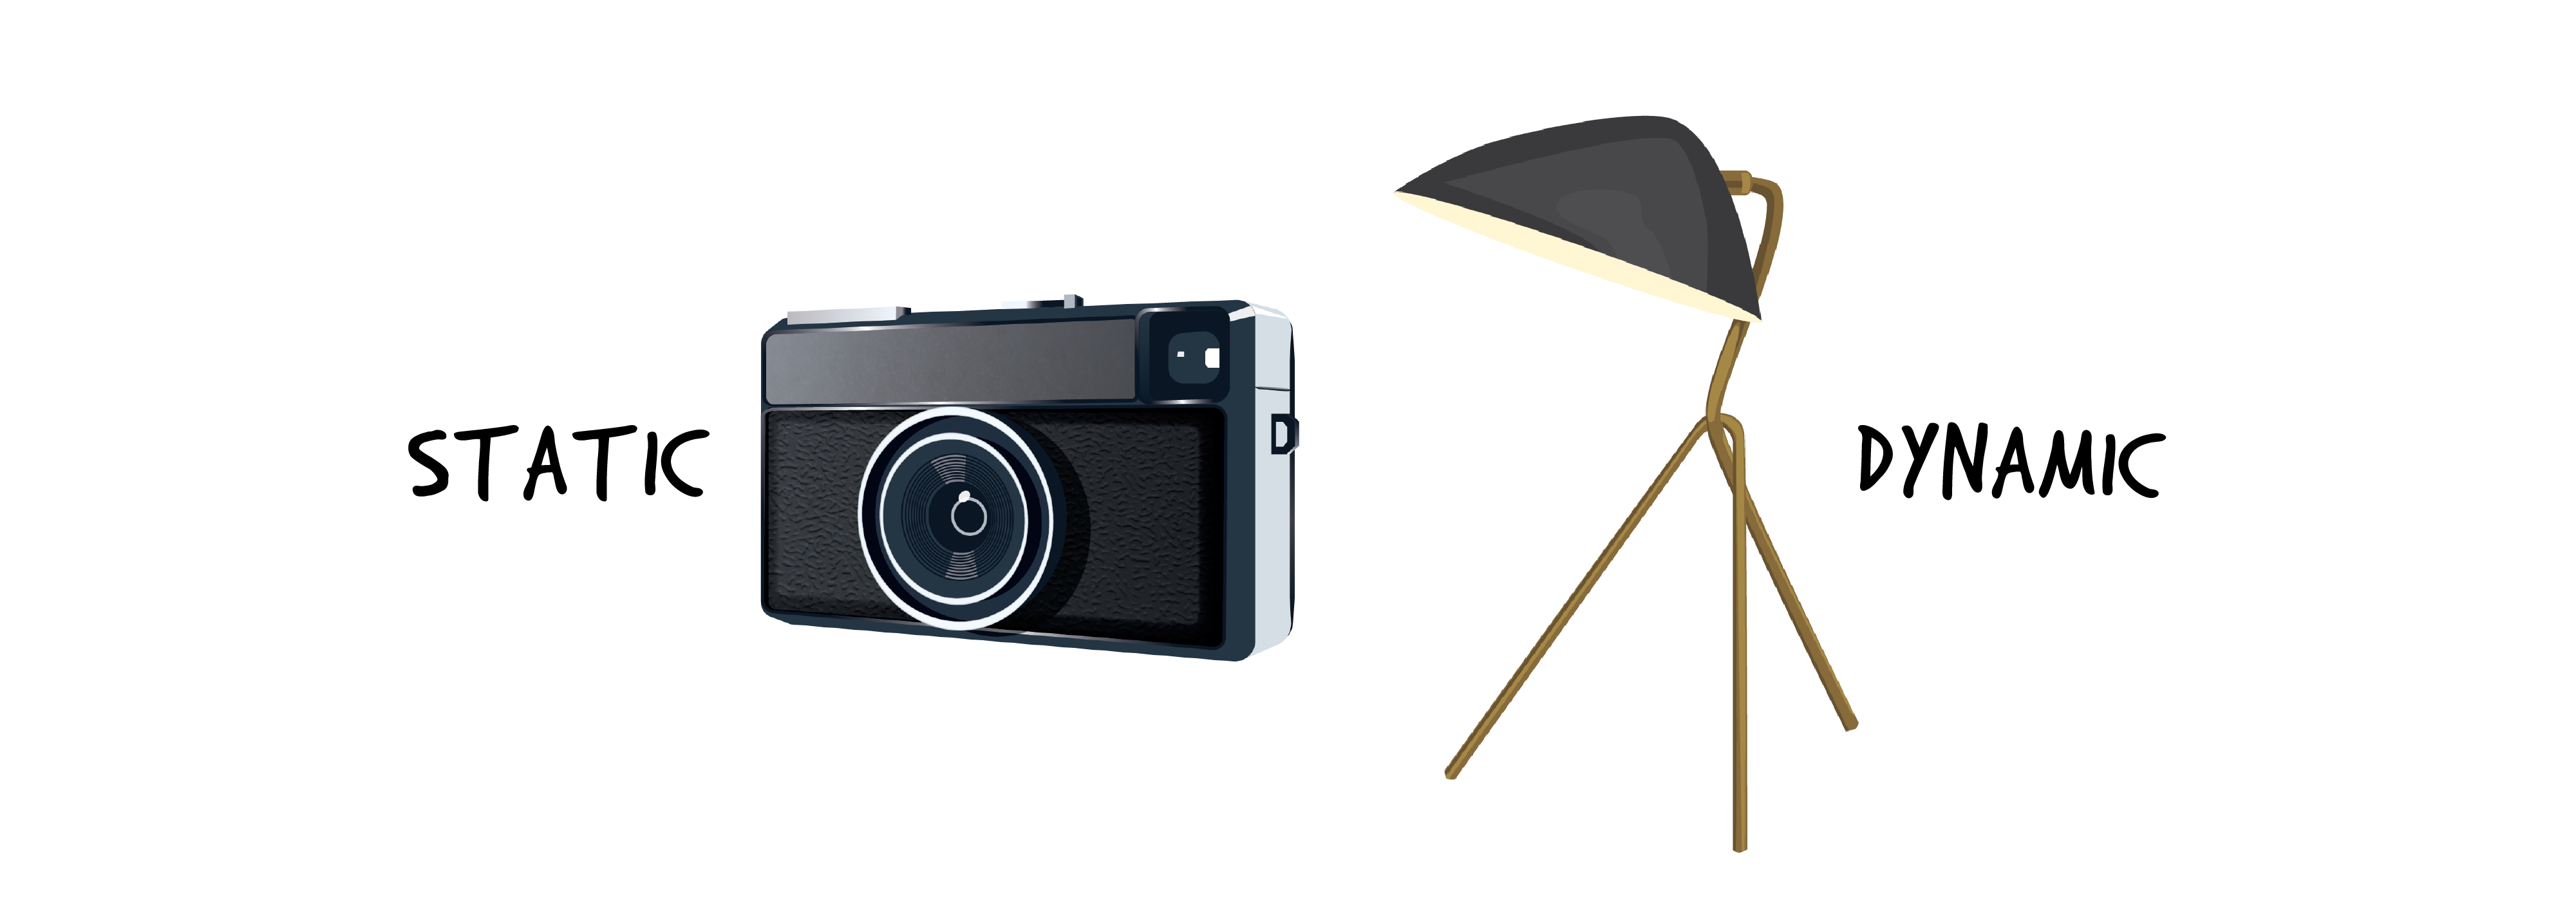 On the left is a black digital camera, showcasing its rectilinear composition. On the right is a lamp in which each component is at an angle to the other: a black, conical lamp shade and 3 wooden tripod-like legs.